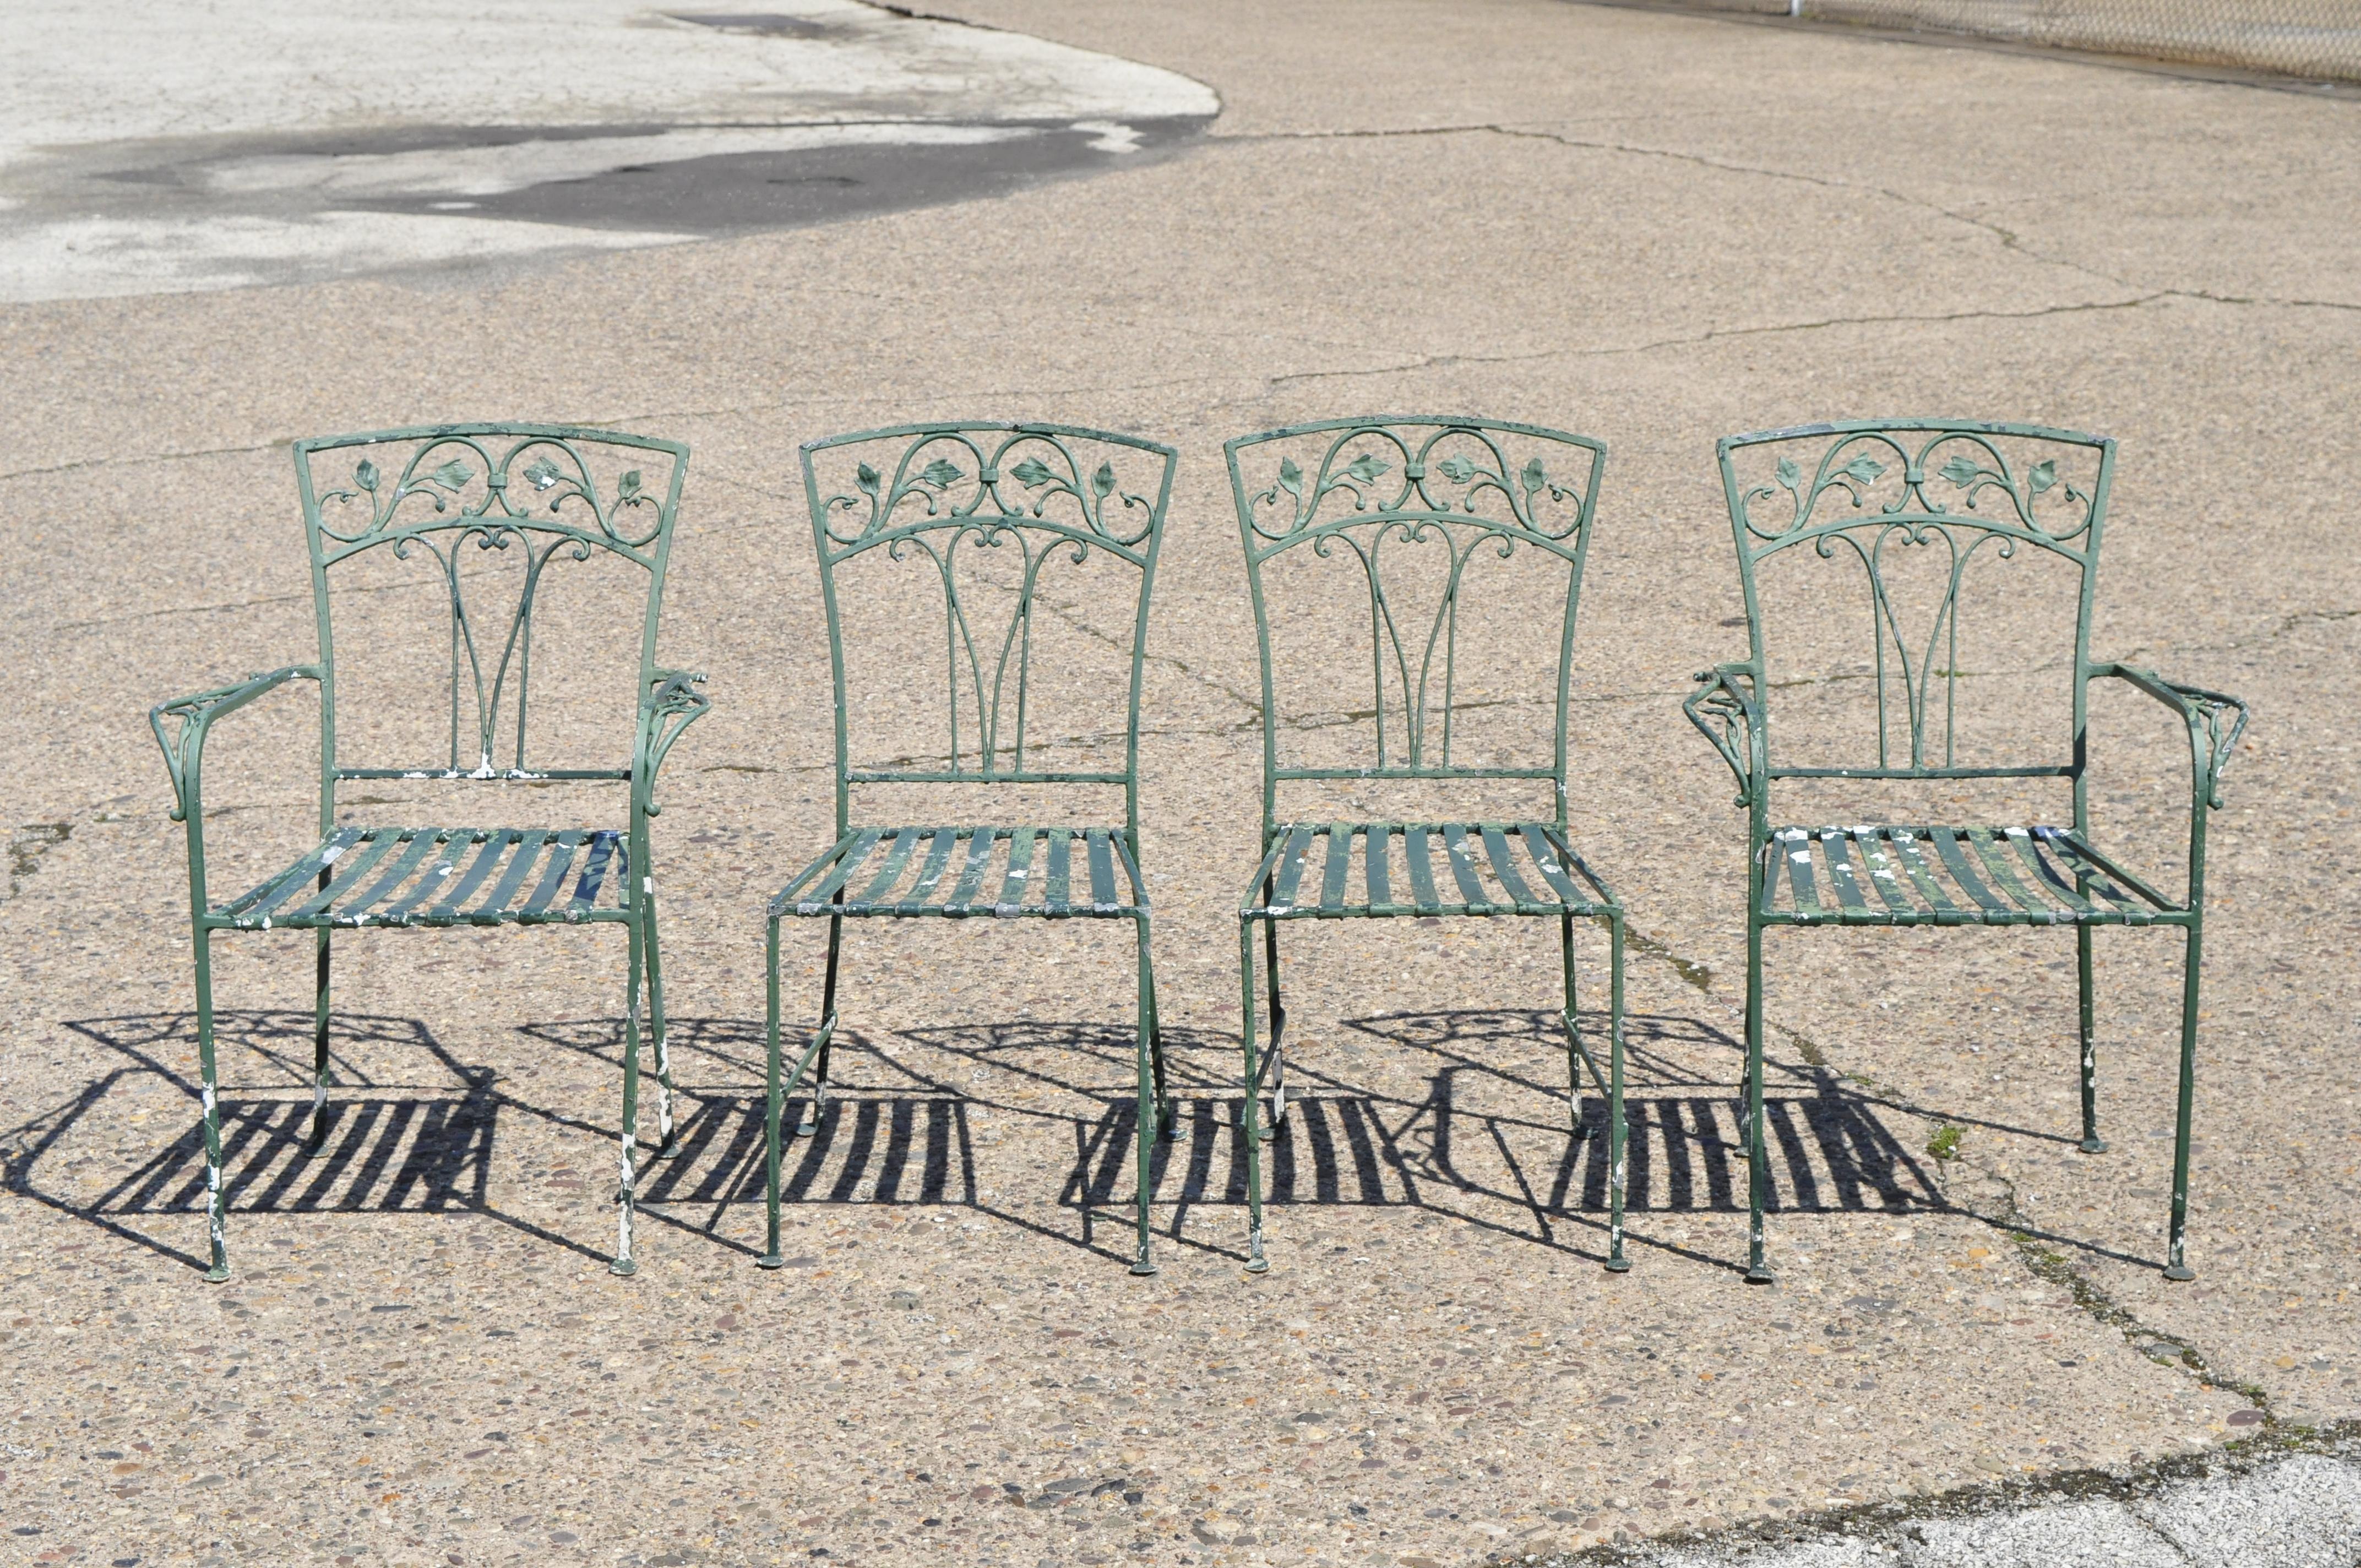 5-piece vintage Salterini leaf and vine patio garden dining set oval table. Listing includes (2) armchair, (2) side chairs, large oval glass top dining table, leaf and vine design, metal strap seats. Mid-20th century. Measurements:

Measures: